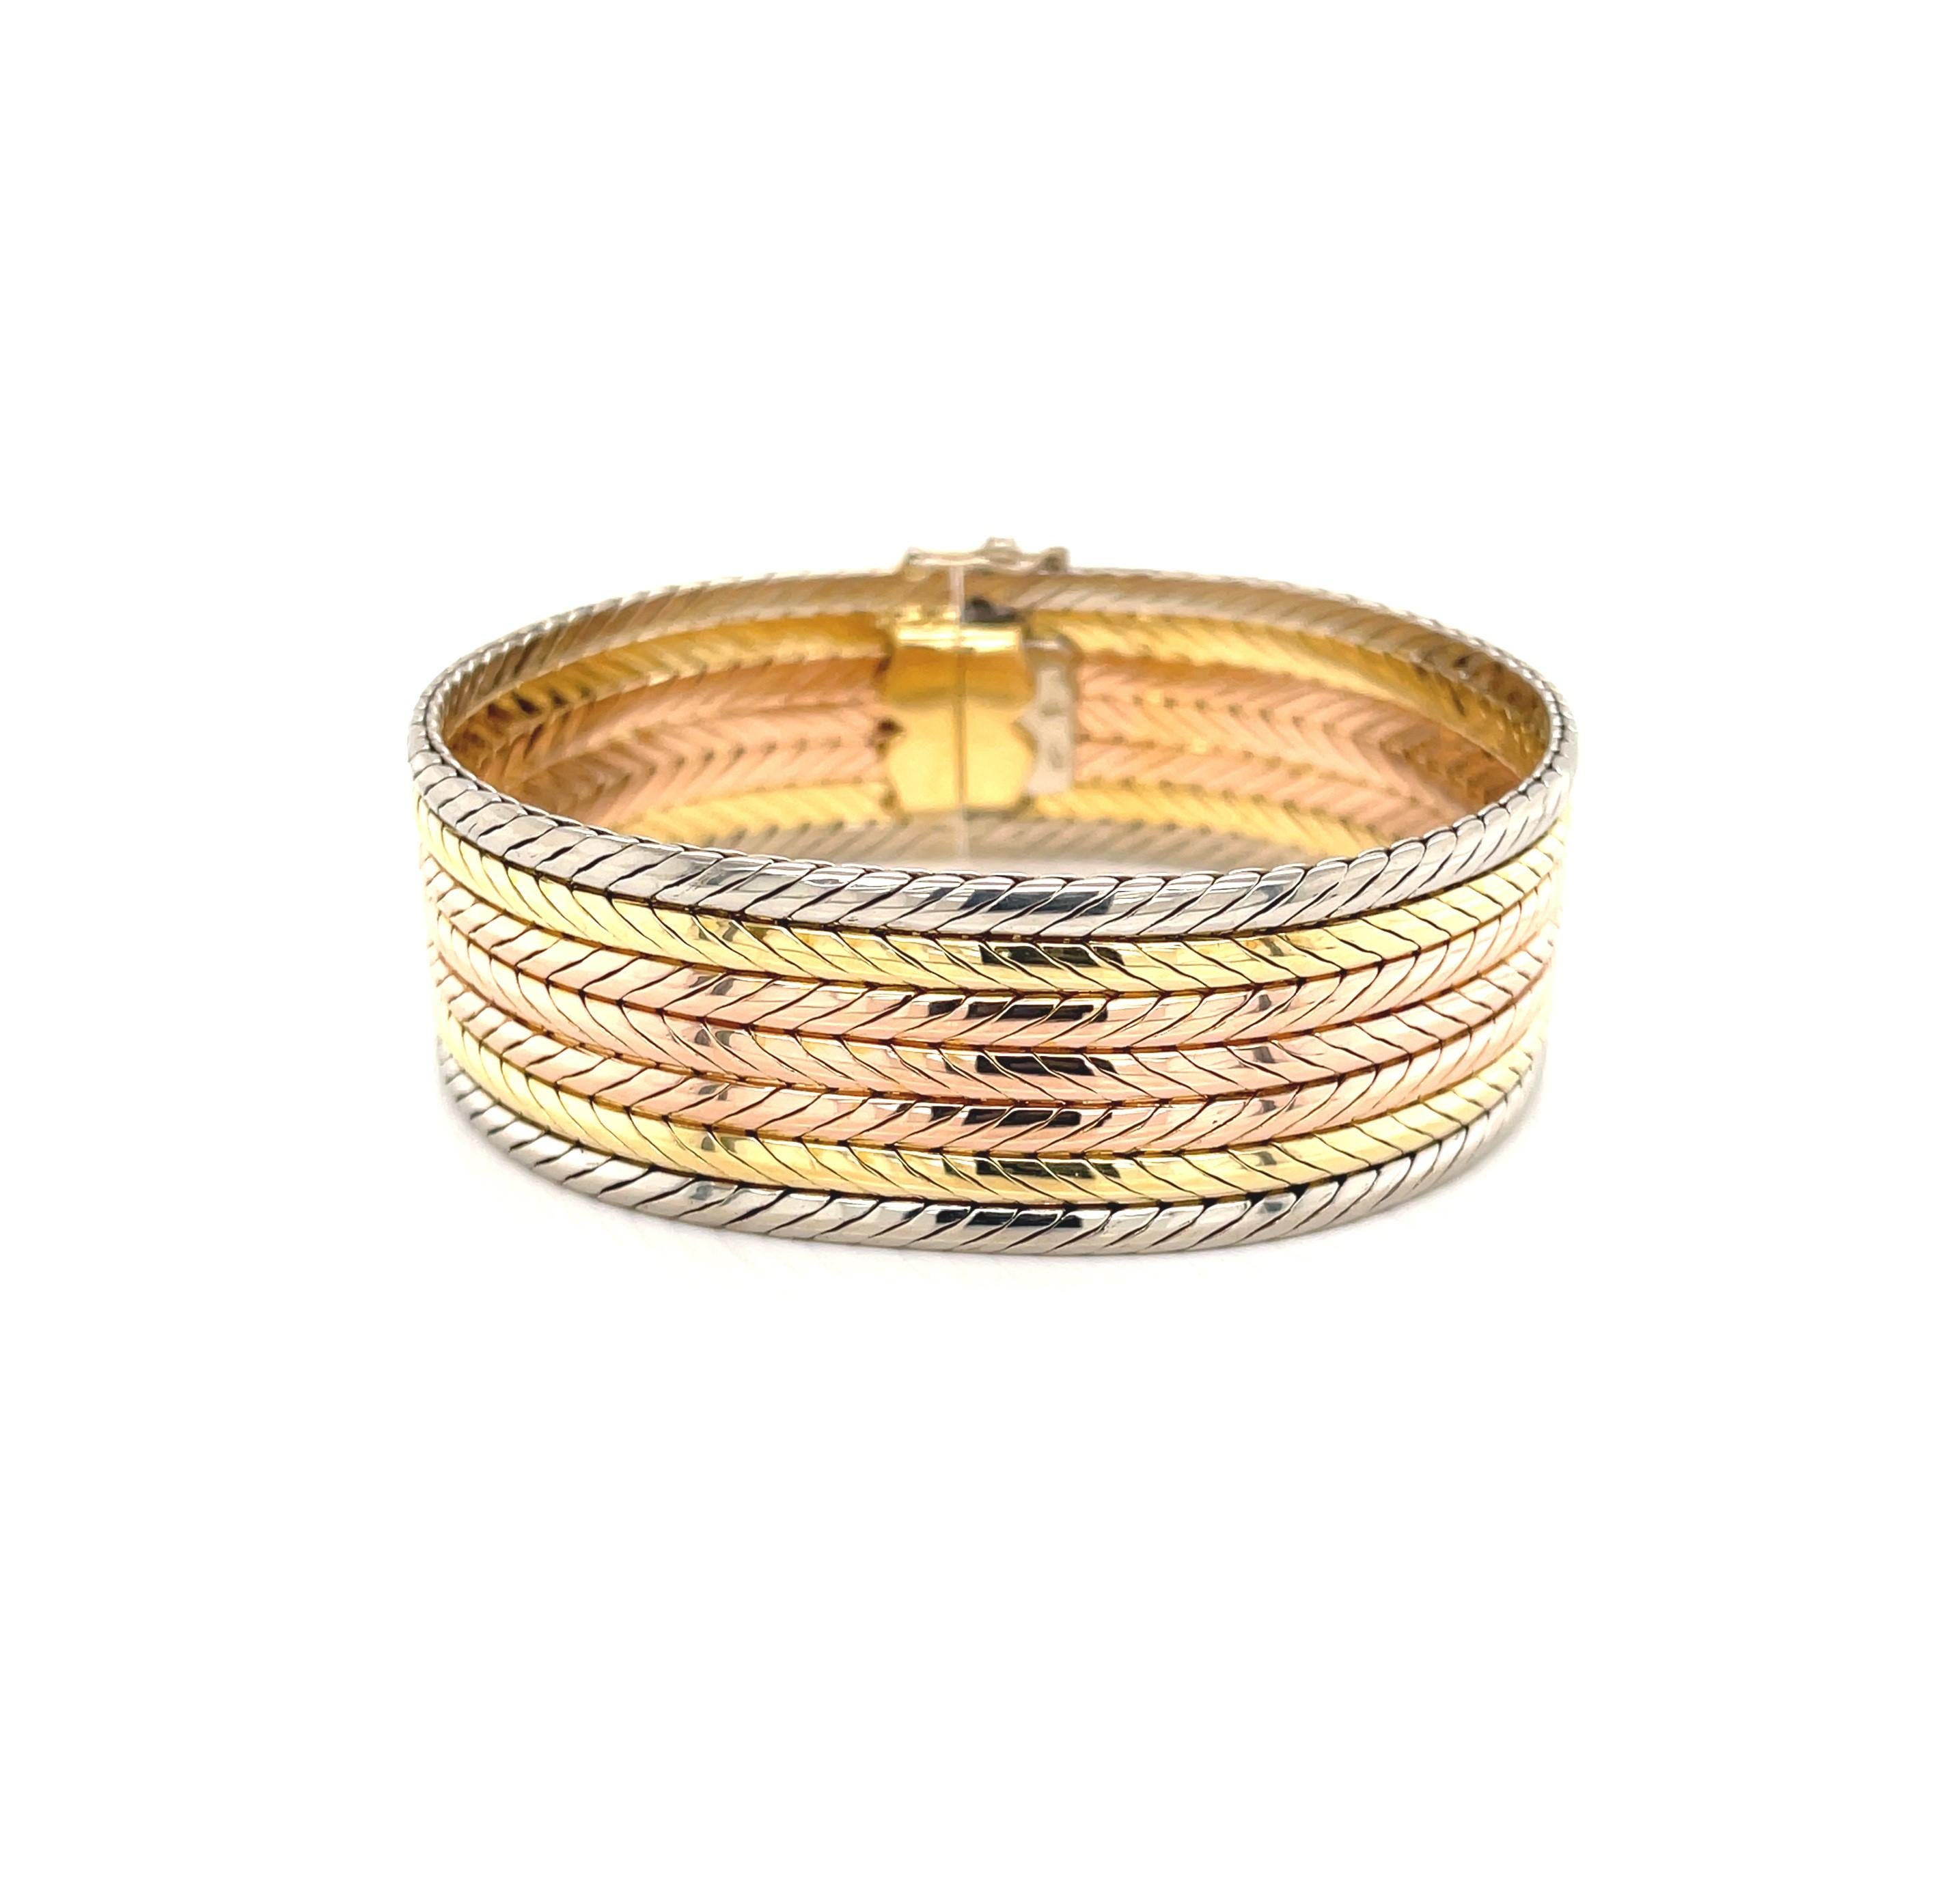 Brilliant 18 karat rose, yellow and white gold in rounded serpentine chain are layered to create this captivatingly bold bracelet. Its colorful golden rainbow makes this piece so very versatile
 and the generous 3/4 inch width certainly makes a fine